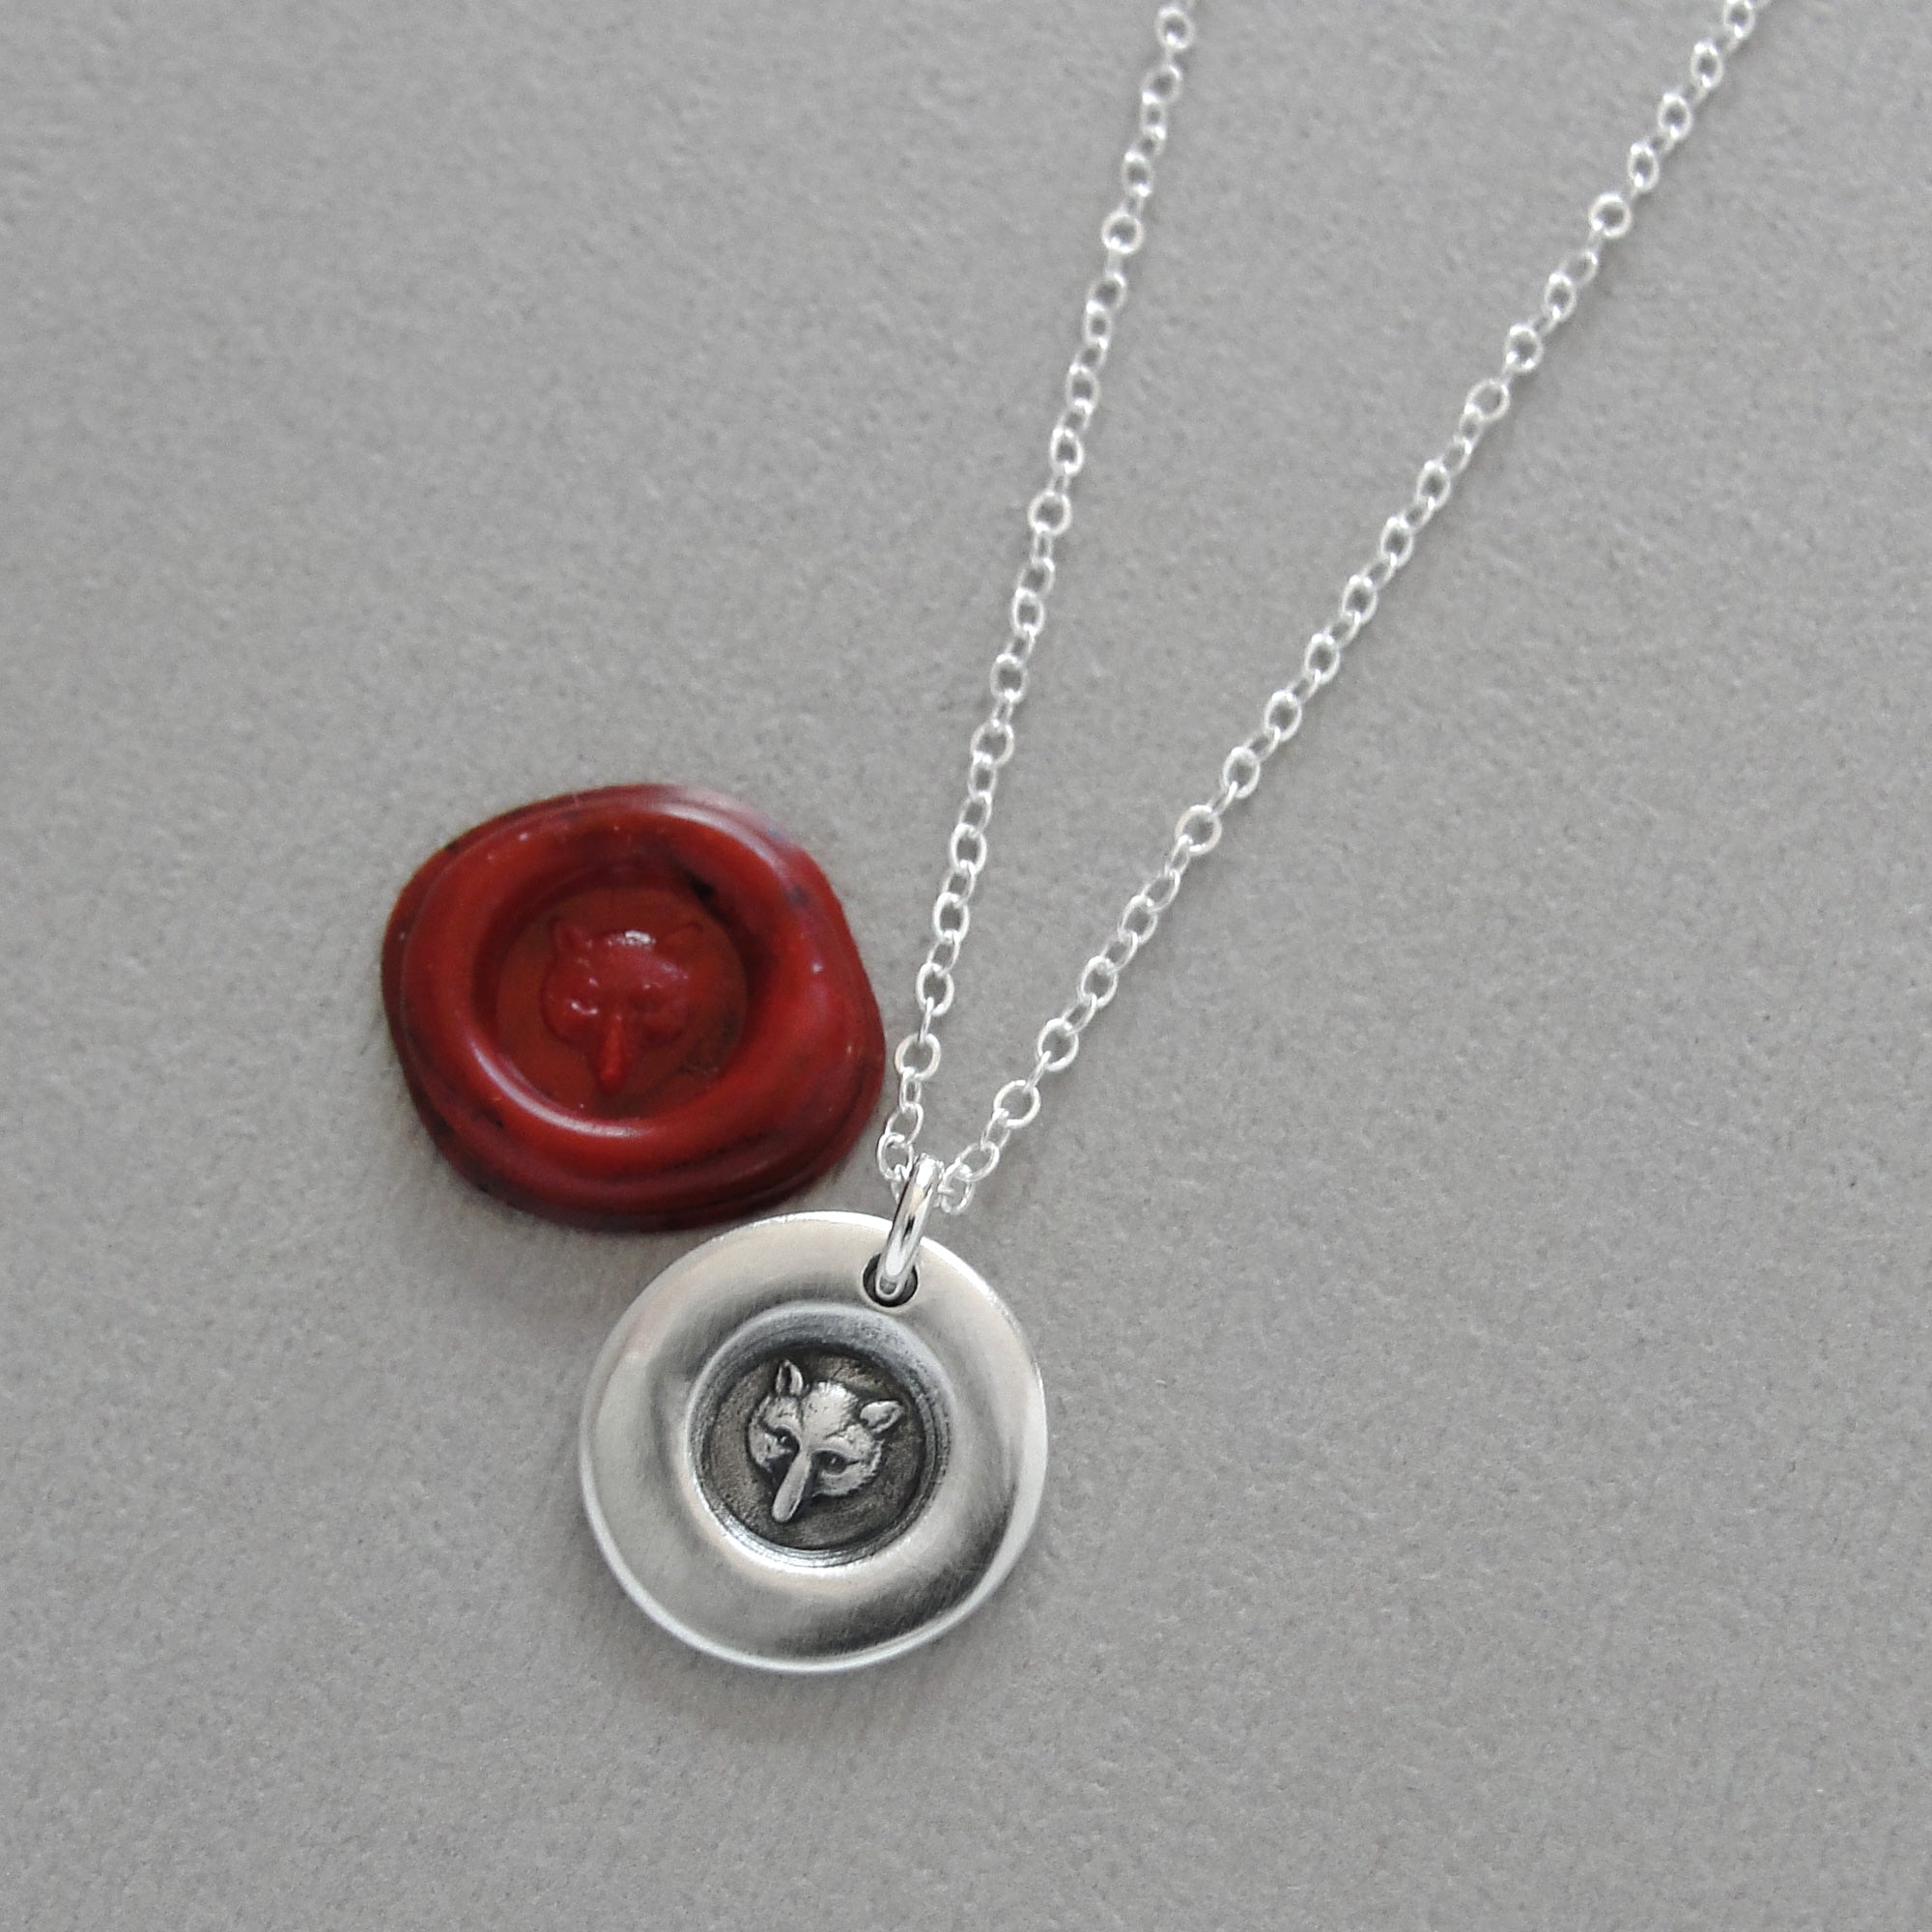 Tiny Fox Mask Wax Seal Necklace In Silver Symbolizing Wisdom Wit